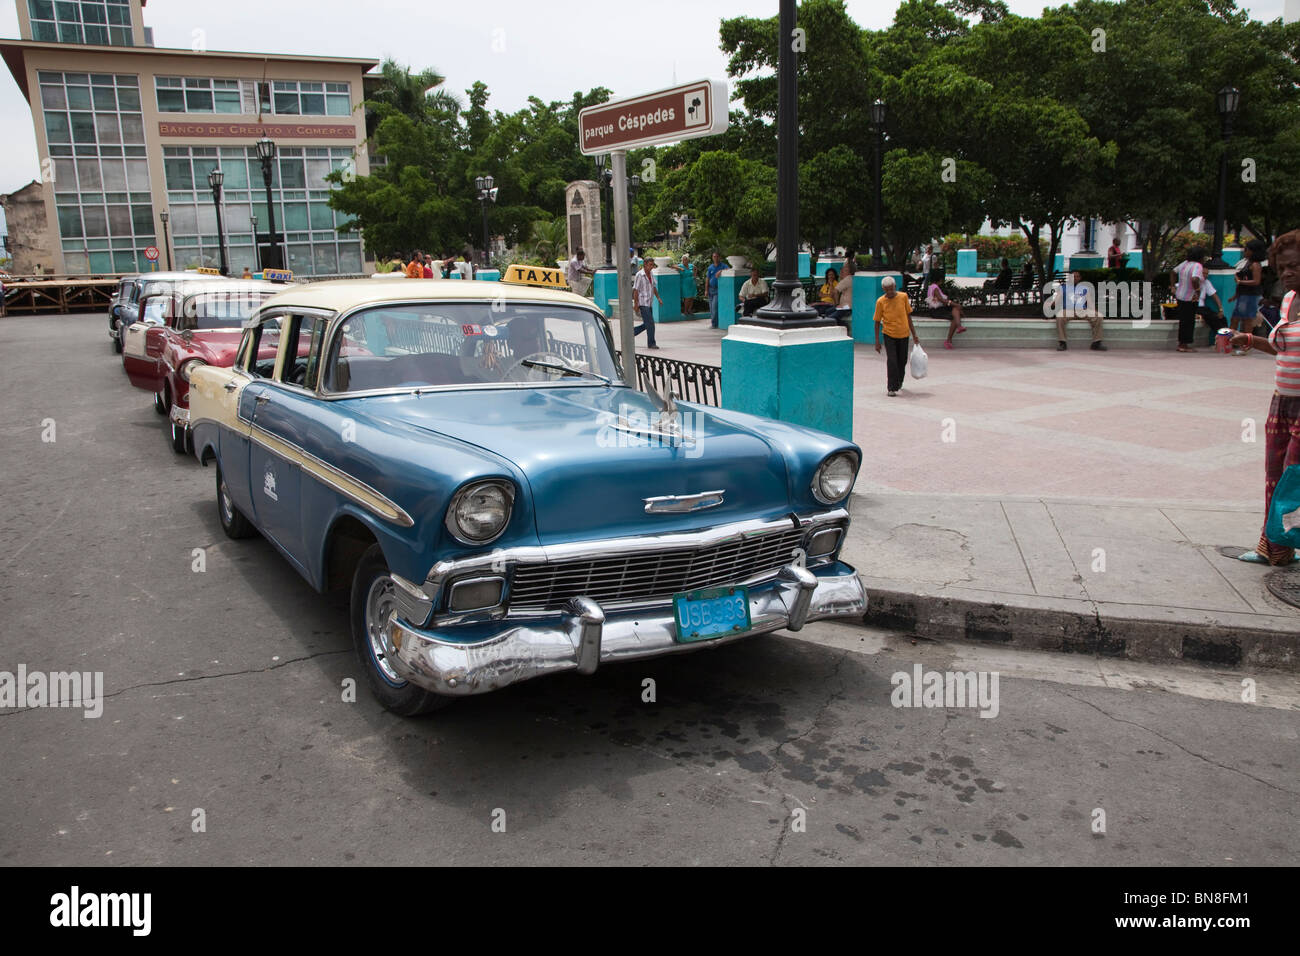 classic american 1950s car used as a taxi in cuba. Stock Photo